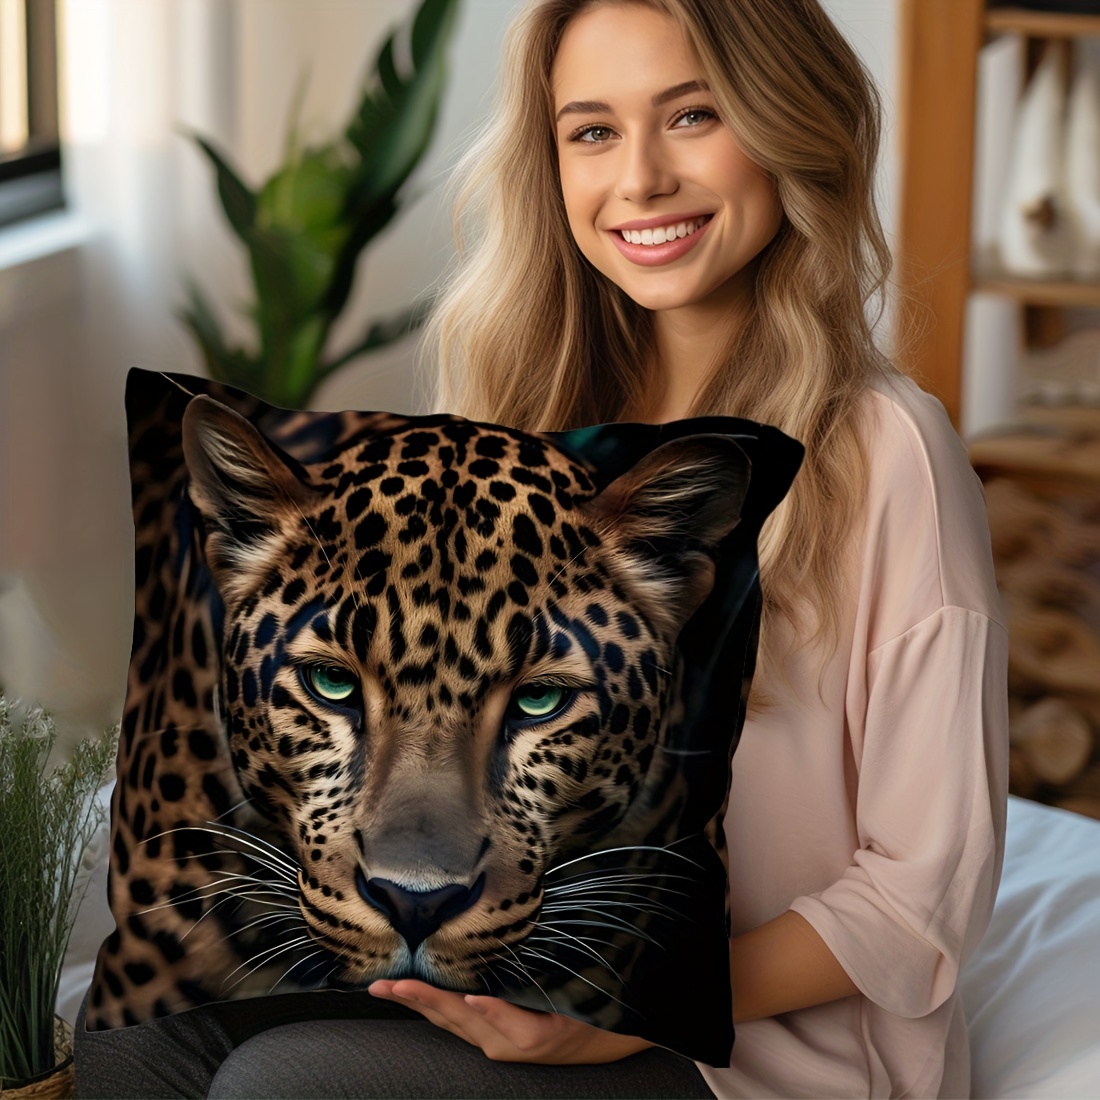 

1pc Leopard Photography Print Pillow Cover, 45x45cm, Peach Skin Velvet Cushion Case For Car, Sofa, Bedroom, Contemporary Style, Home Decor, Soft Touch Decorative Throw Pillow Cover Without Insert